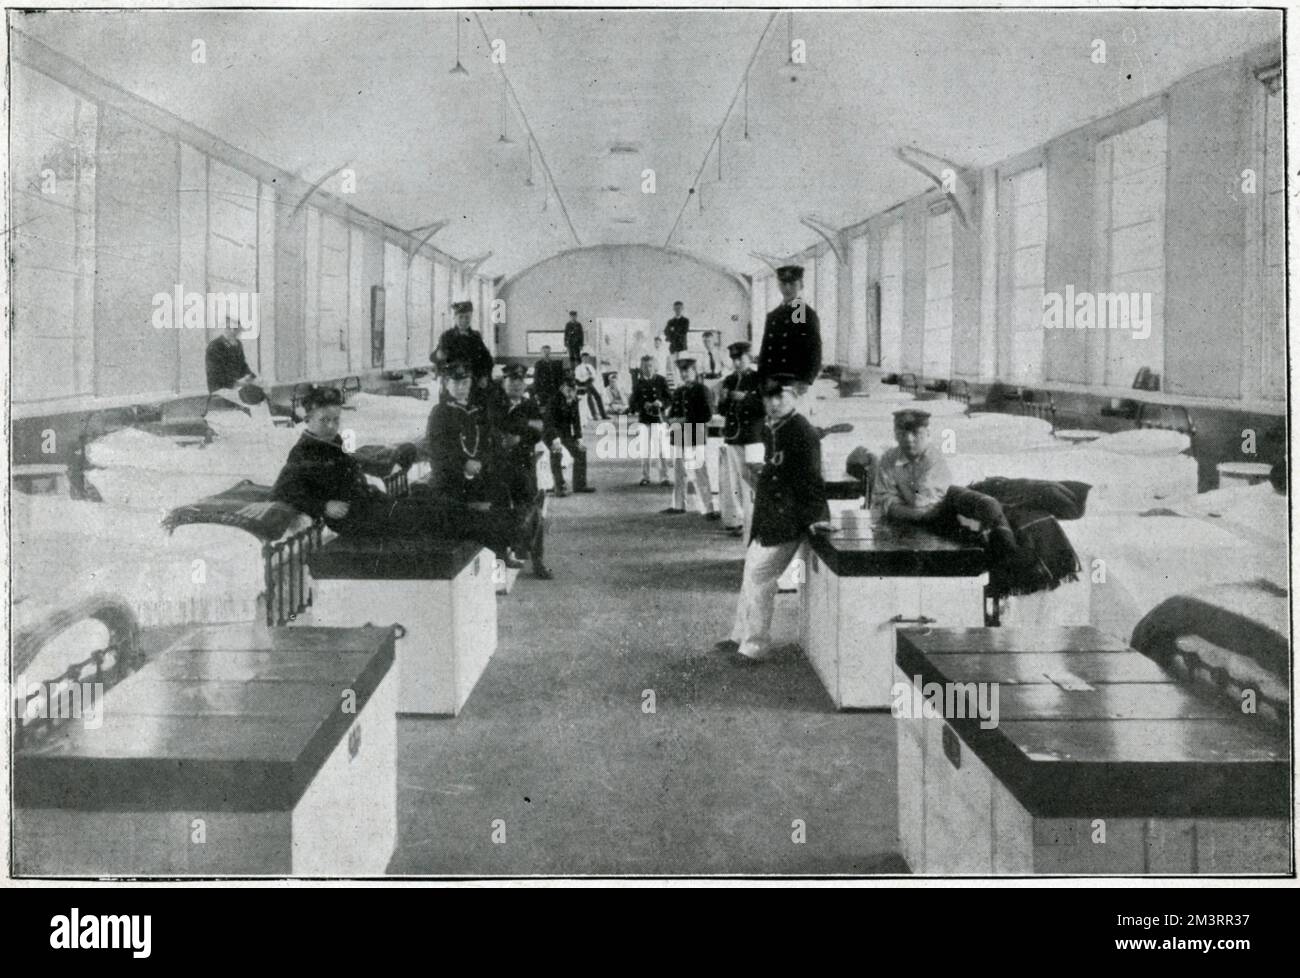 In 1903, part of the estate, the Stable Block being the hub, became a junior officer training college for the Royal Navy known as the Royal Naval College, Osborne, initial training began at the age of 13. Photograph showing the dormitories, where they were up at 6:30 in the morning.     Date: 1905 Stock Photo